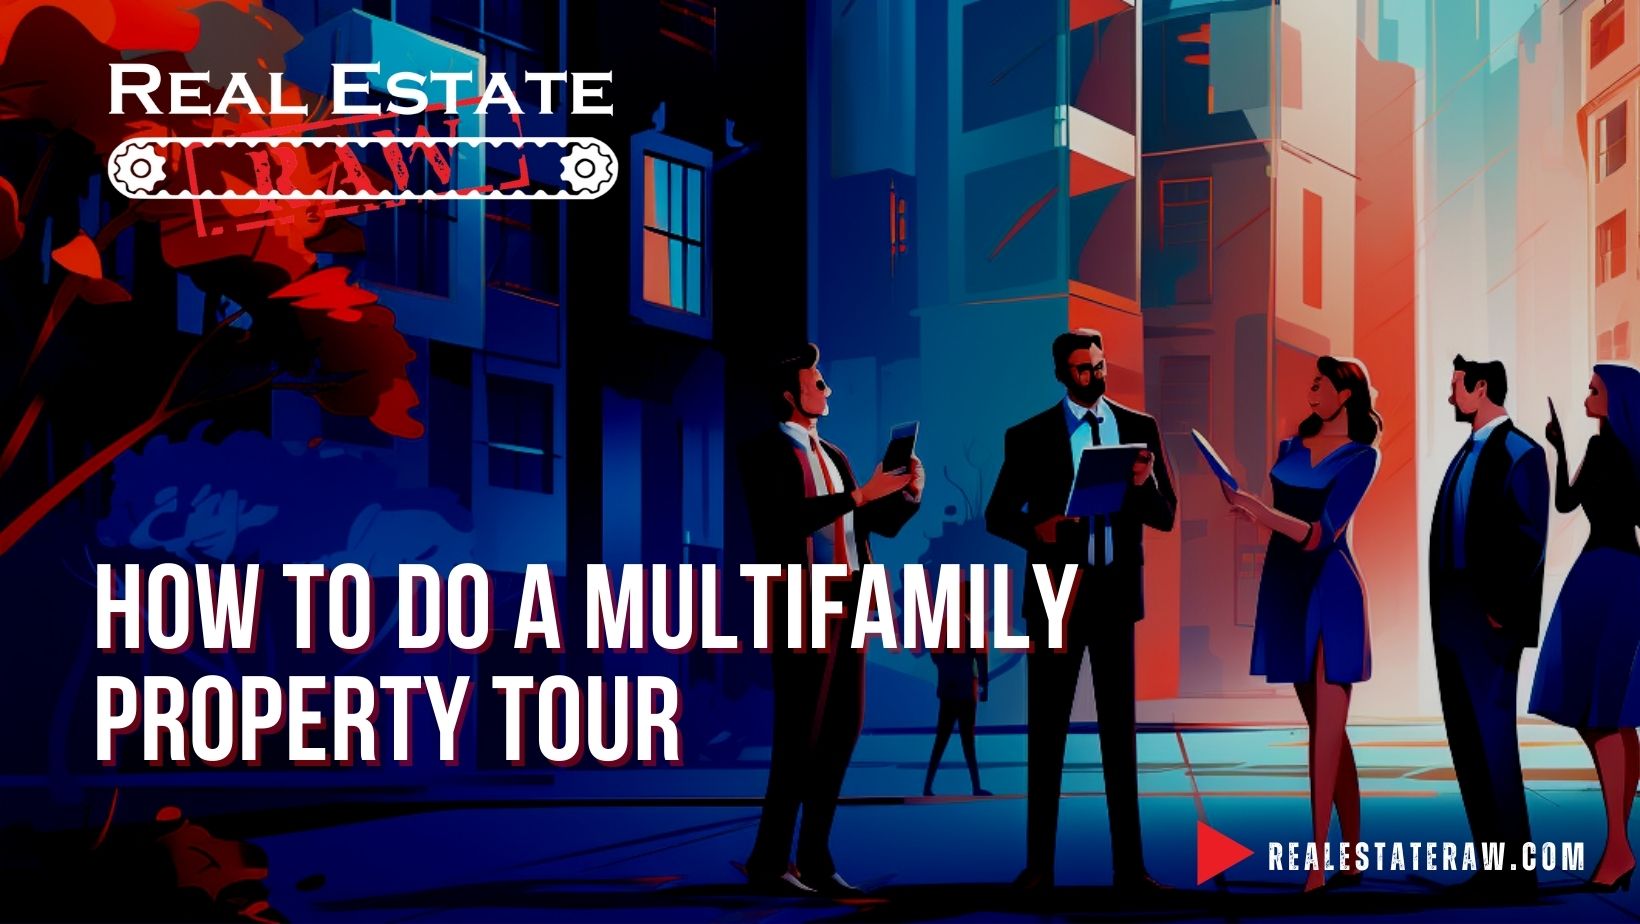 How to do a Multifamily Property Tour